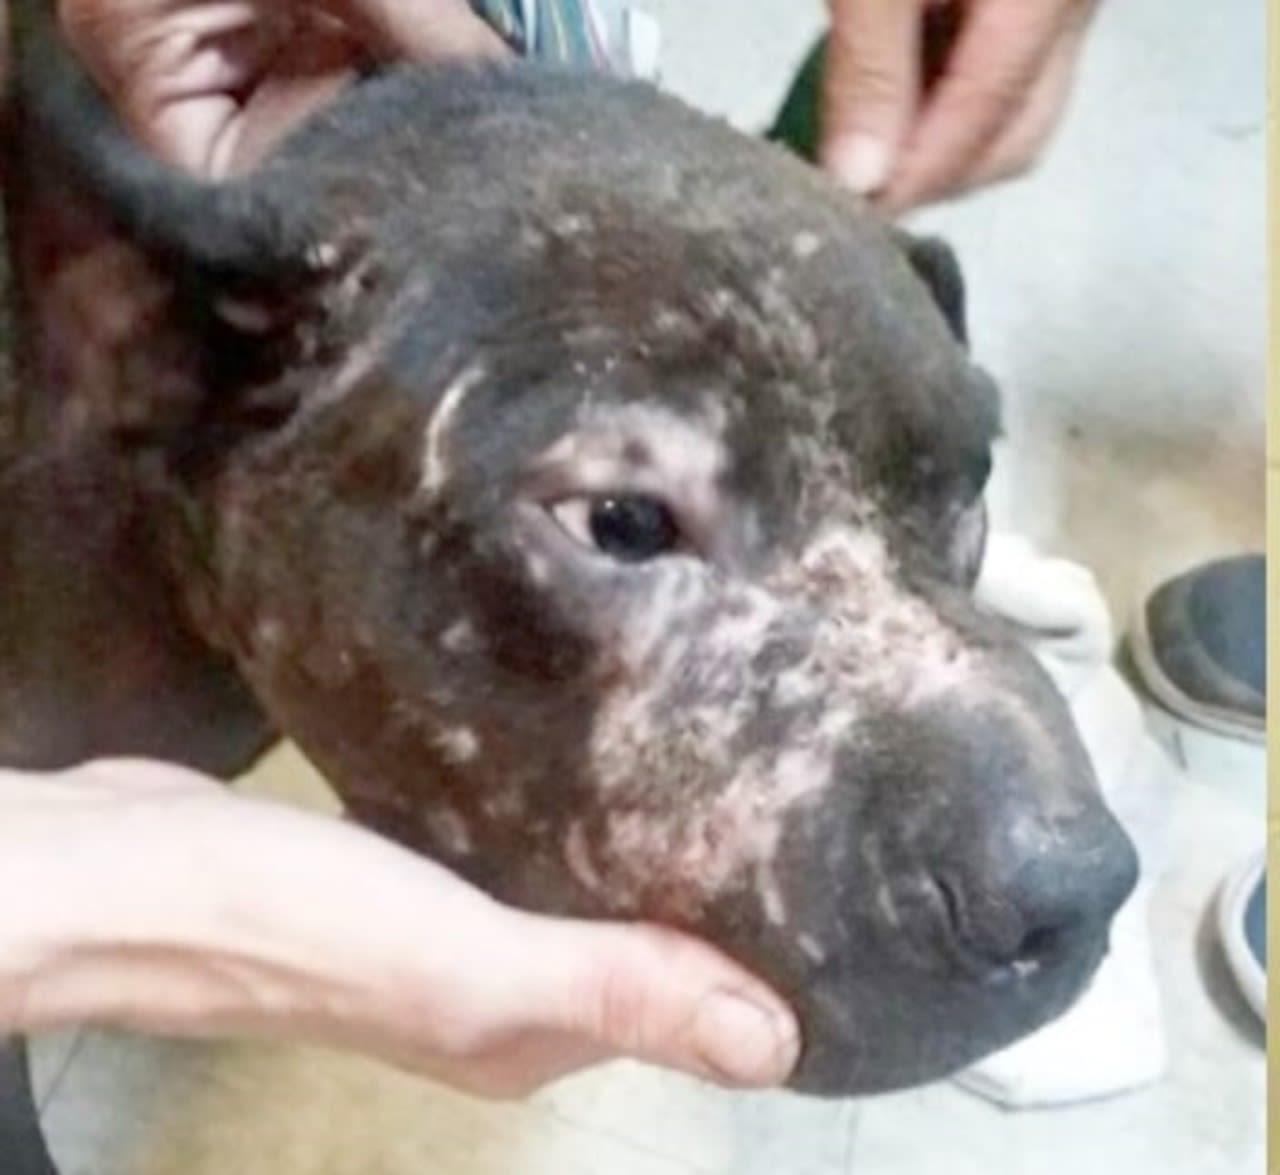 Alabama man pleads guilty to operating large dogfighting ring in Monroe County